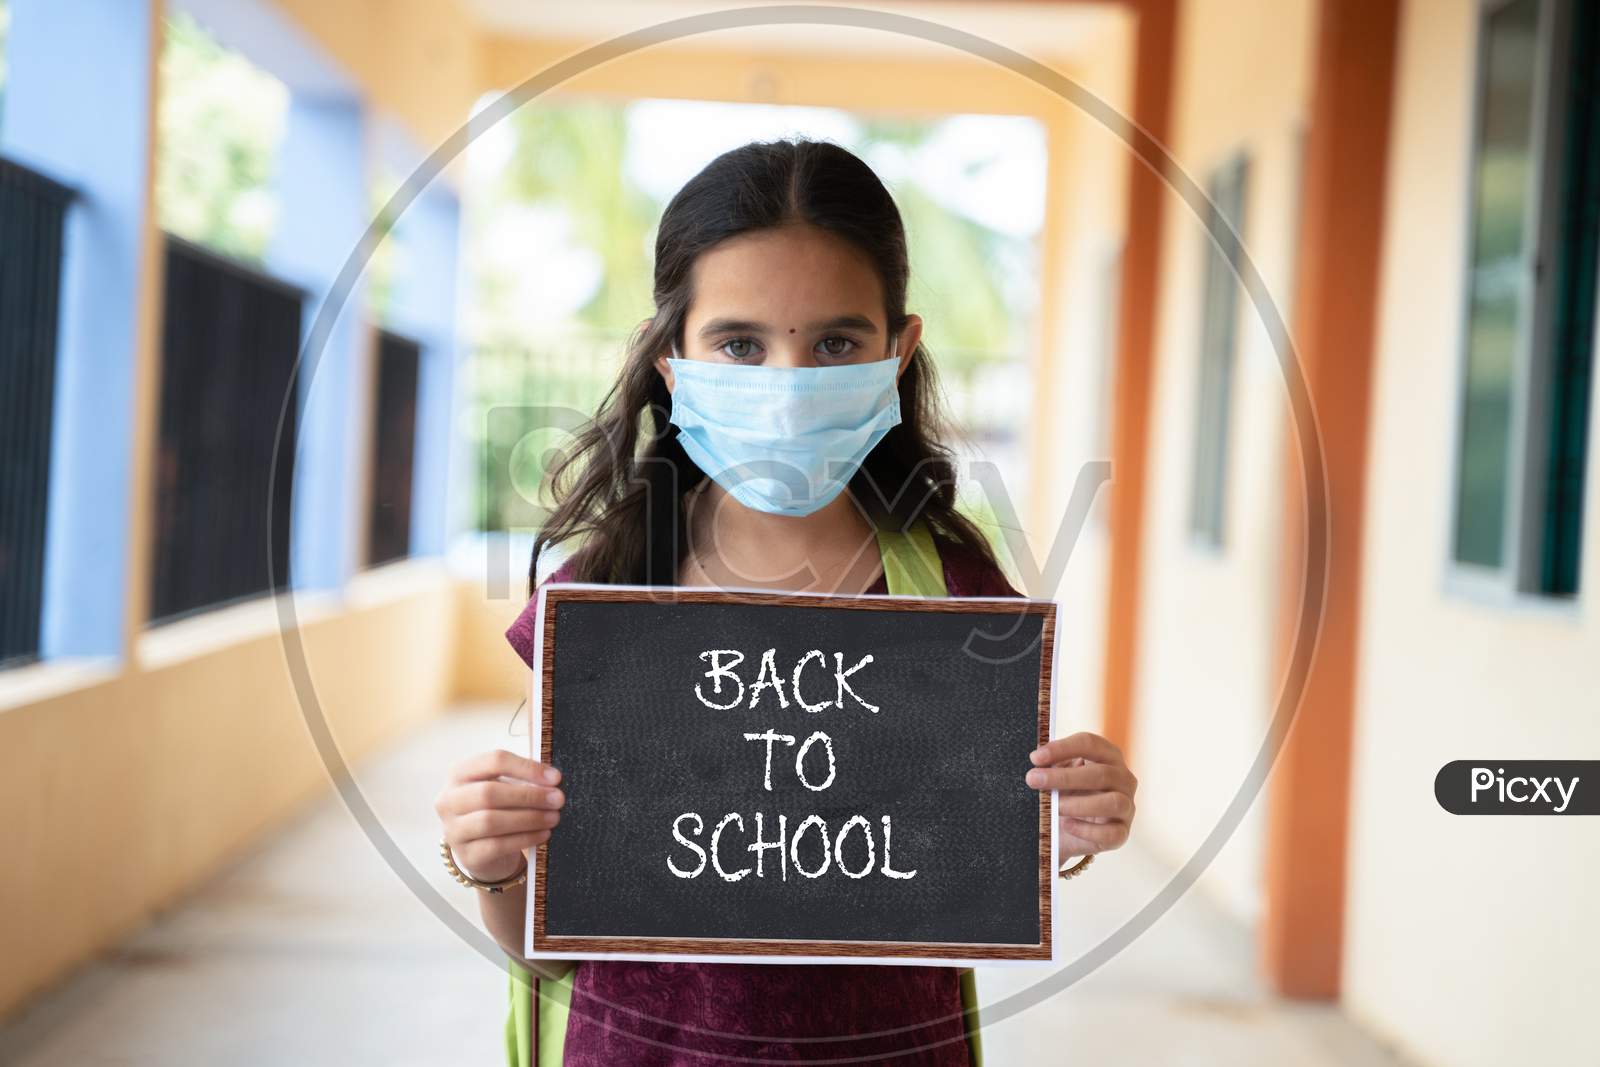 Young Girl In Medical Mask Holding Back To School Signage Board At Corridor - Concept Of School Reopen, Lifestyle And New Normal.